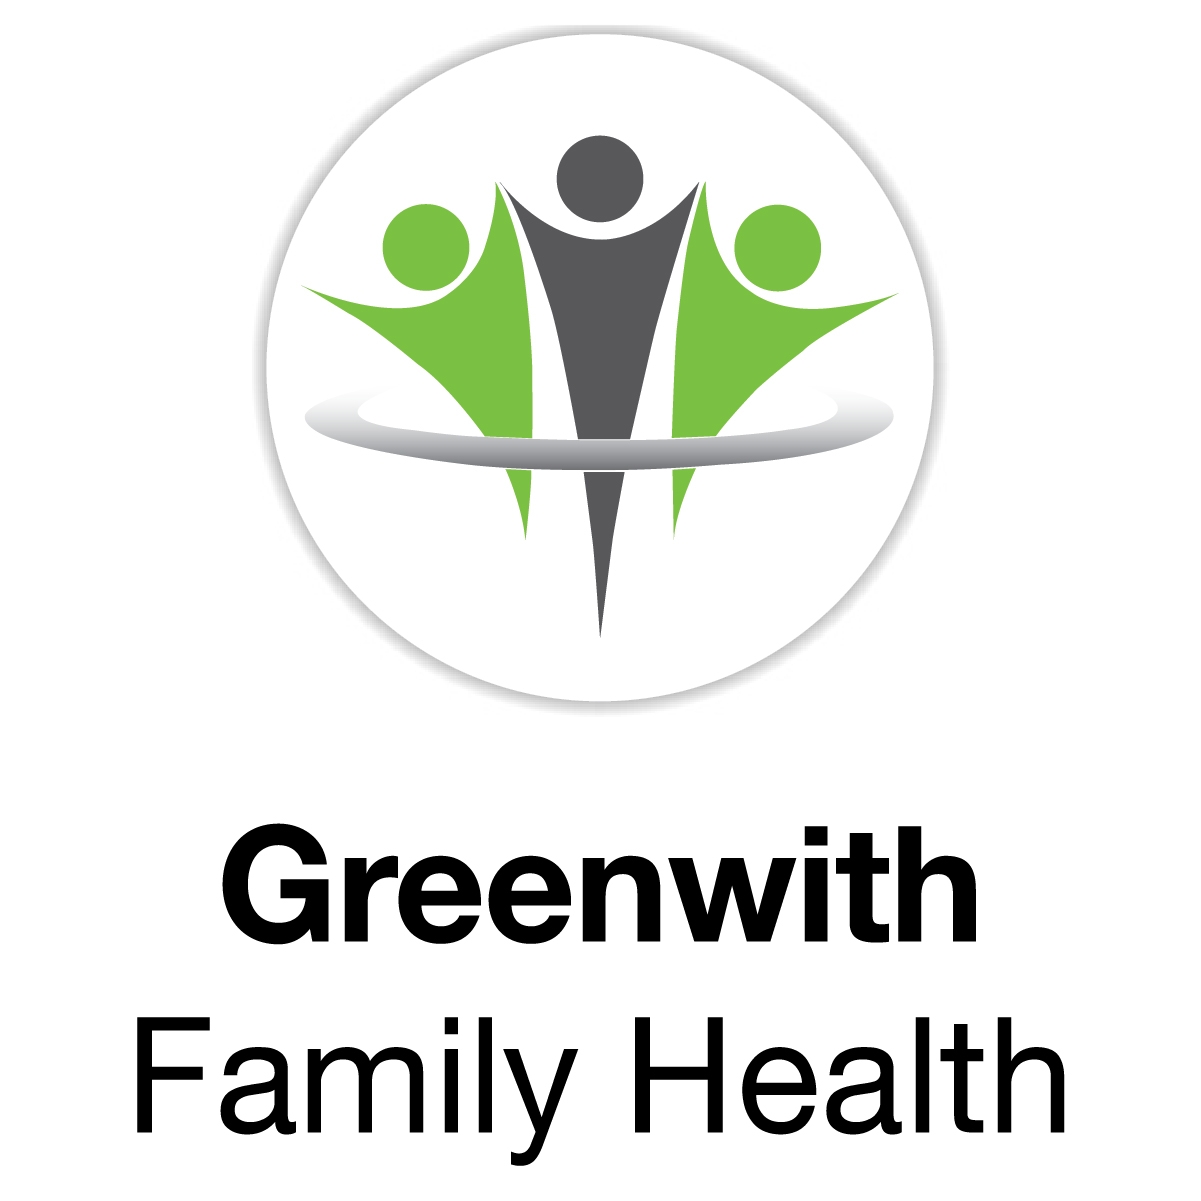 Greenwith Family Health Care